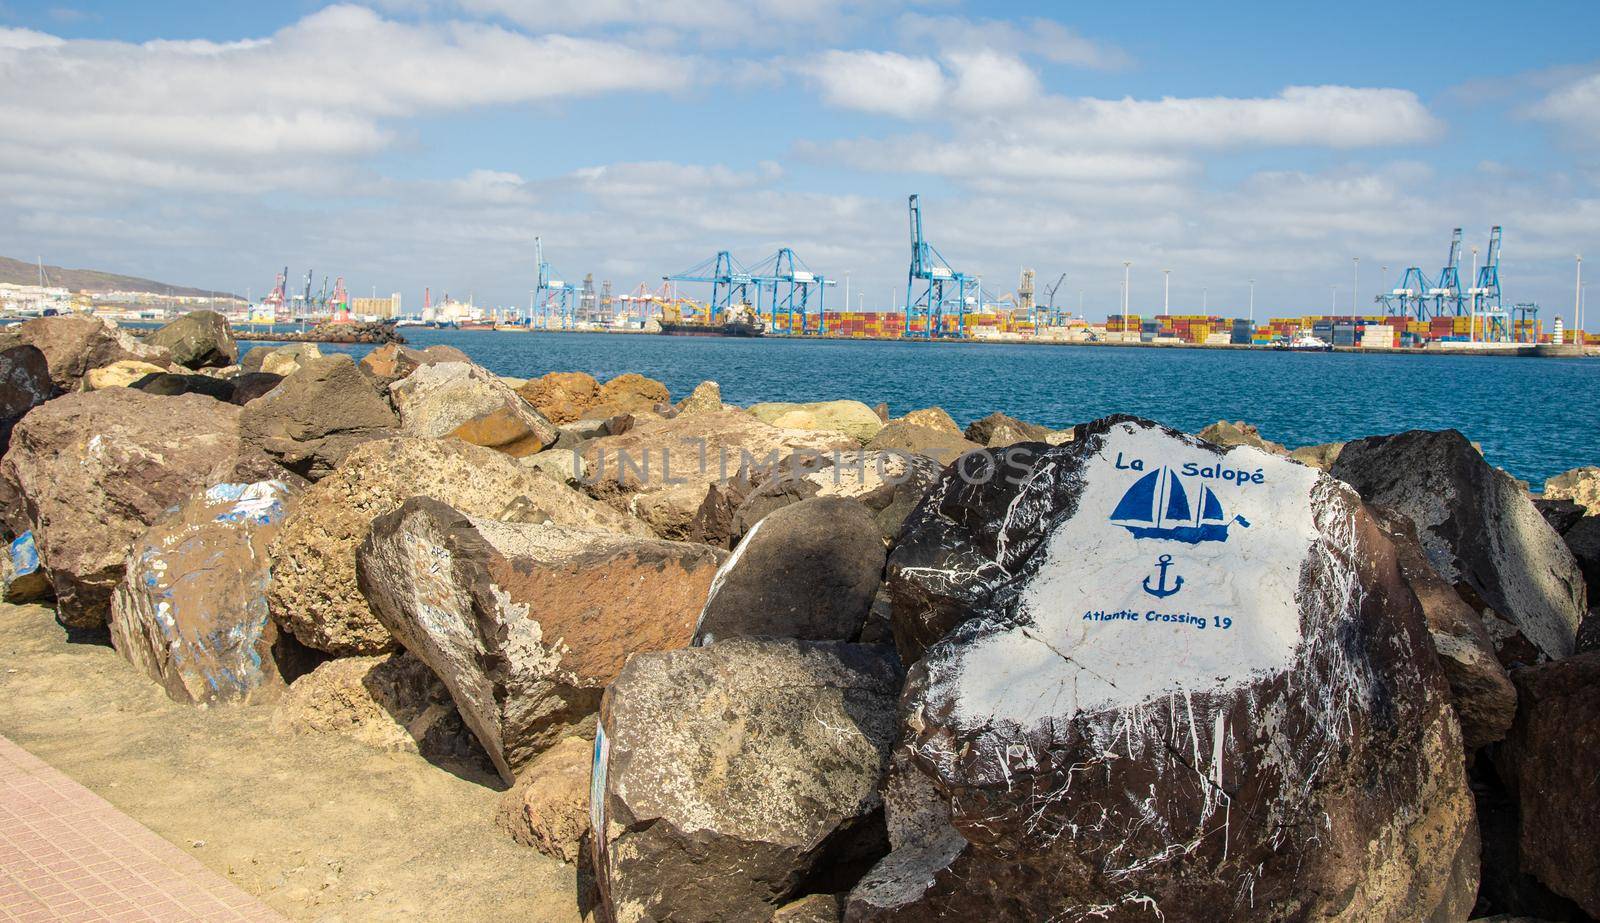 Paintings on stones in the harbour of Las Palmas de Gran Canary Spain, in the background you can see the industrial harbour